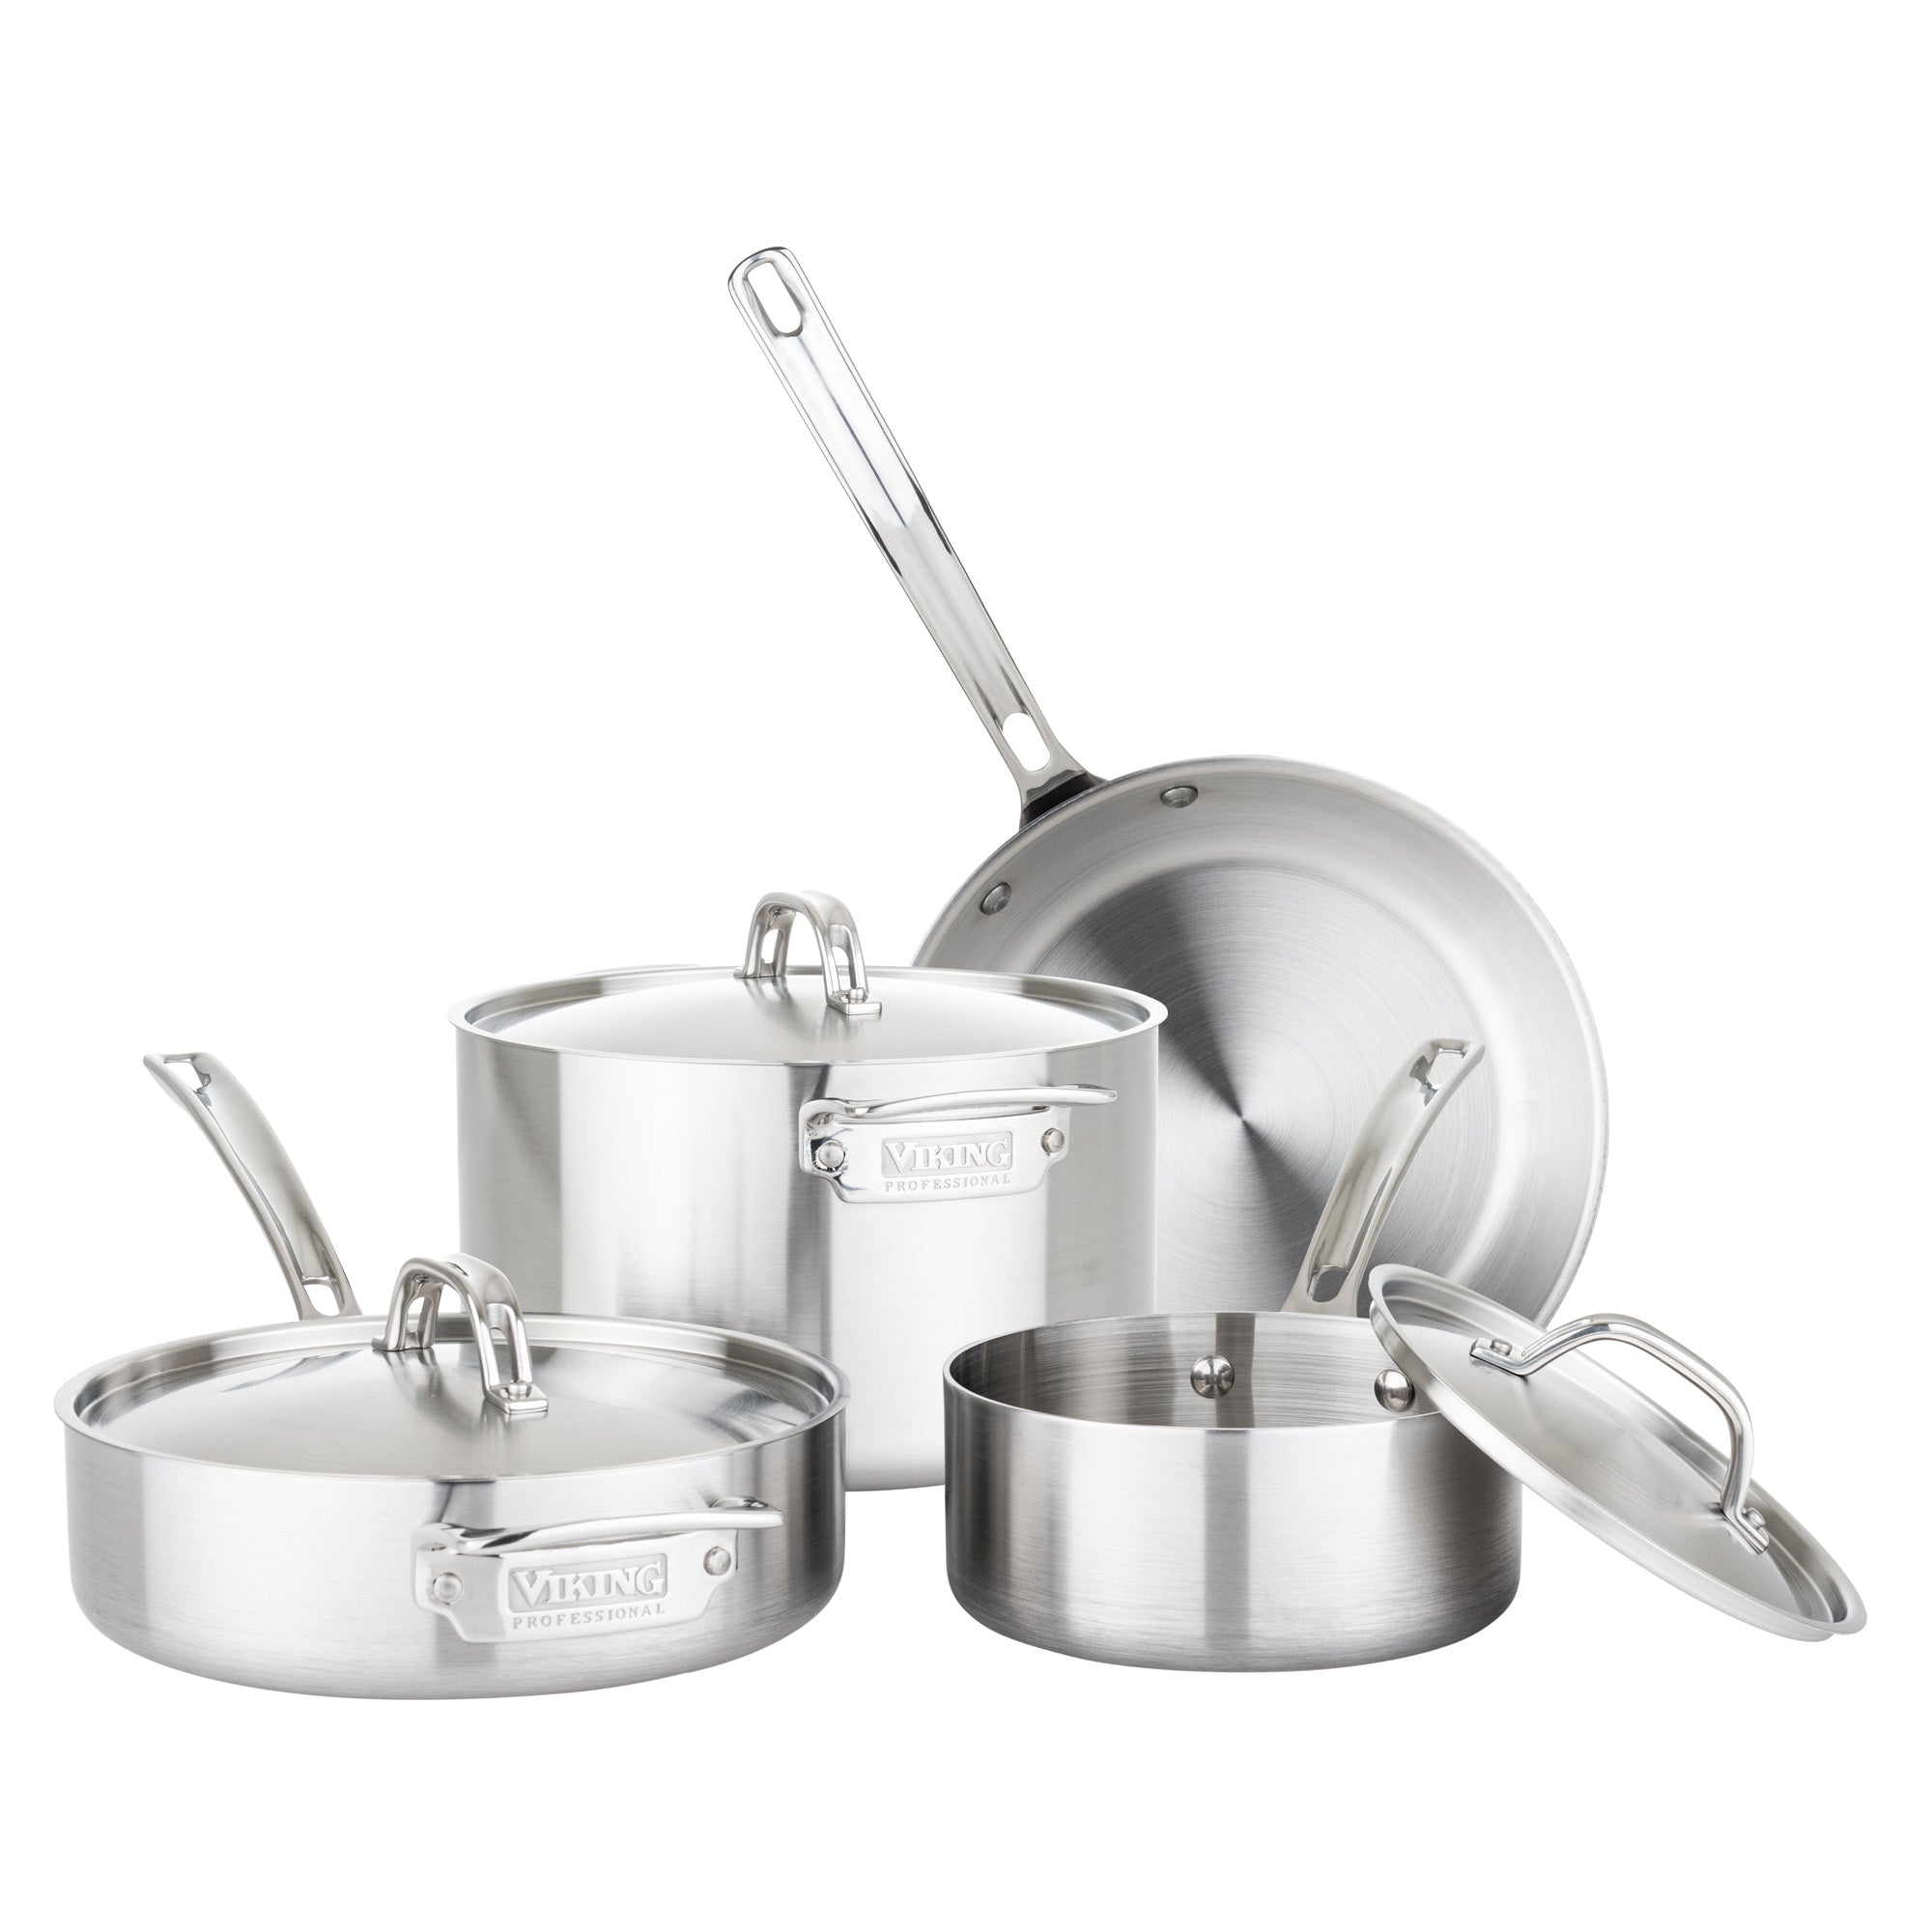 7 Pc. Pro Series COOKWARE SET Magnetic 304 Stainless Steel Made in USA